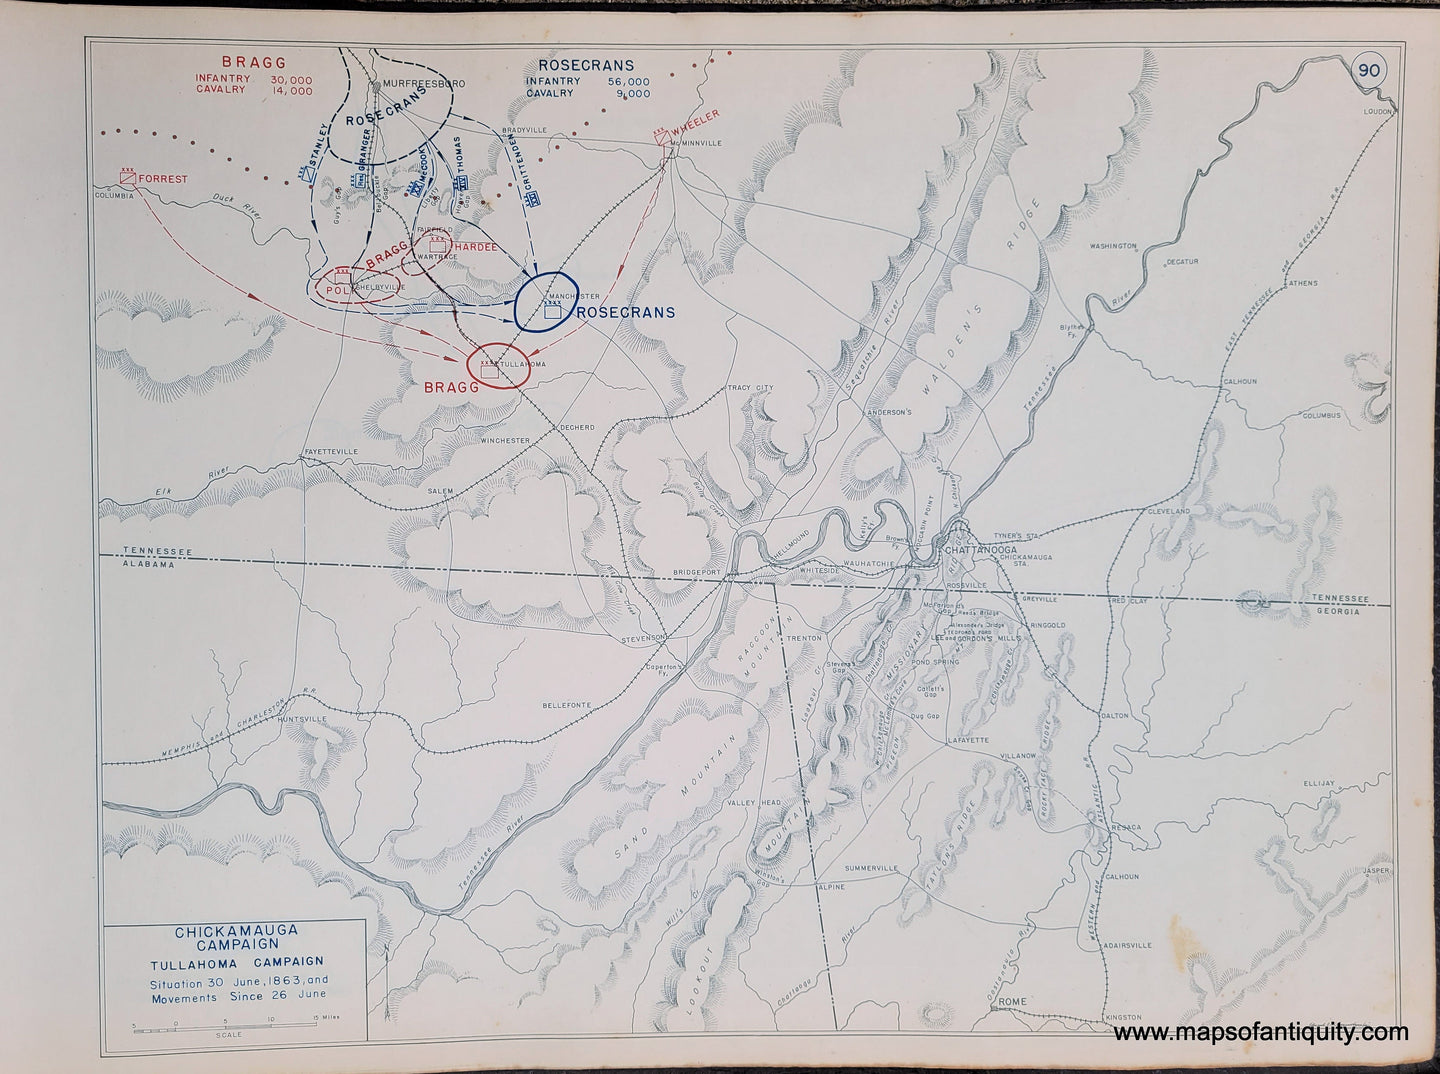 Genuine-Antique-Map-Chickamauga-Campaign-Tullahoma-Campaign-Situation-30-June-1863-and-Movements-Since-26-June-1948-Matthew-Forney-Steele-Dept-of-Military-Art-and-Engineering-US-Military-Academy-West-Point-Maps-Of-Antiquity